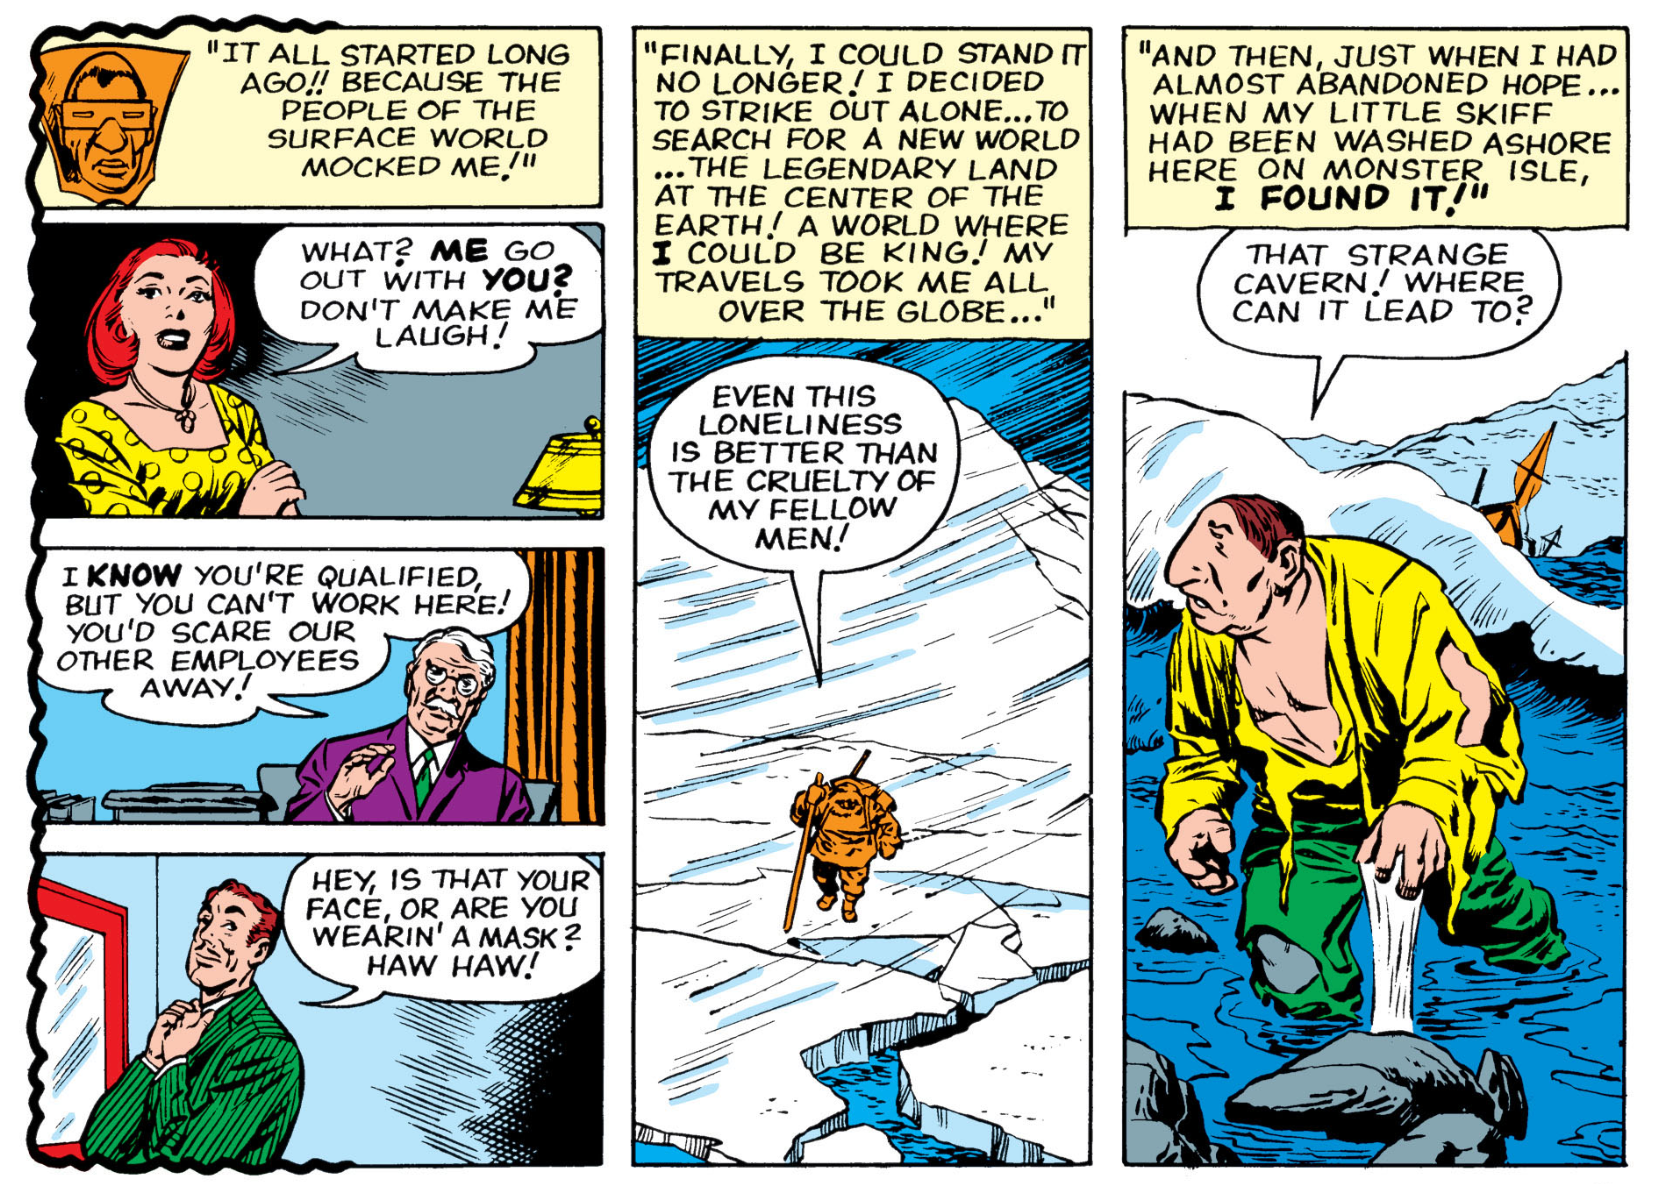 The plight of Mole Man, getting turned down by woman, turned away at a job because he's unsightly, and laughed at by handsome dudes. He's seen making the trek across the ice to Monster Island.